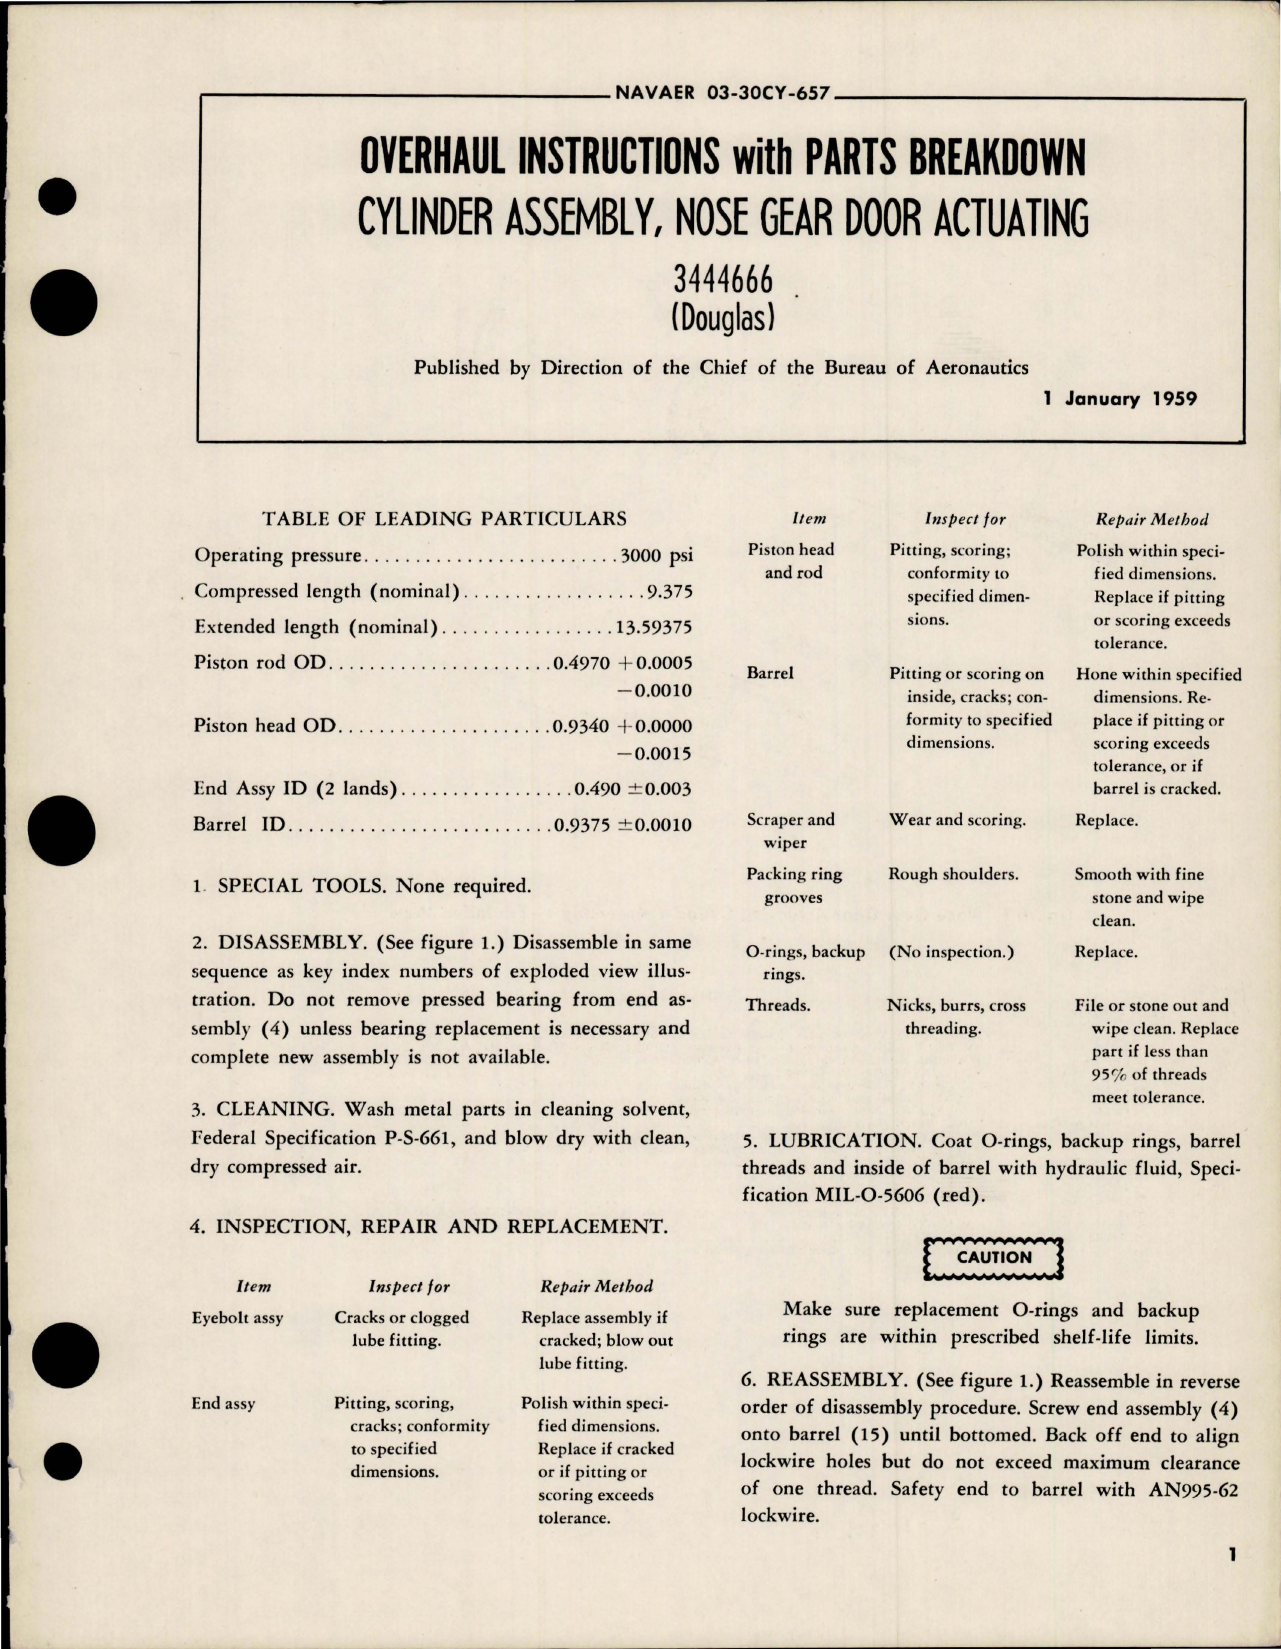 Sample page 1 from AirCorps Library document: Overhaul Instructions with Parts for Nose Gear Door Actuating Cylinder Assembly - 3444666